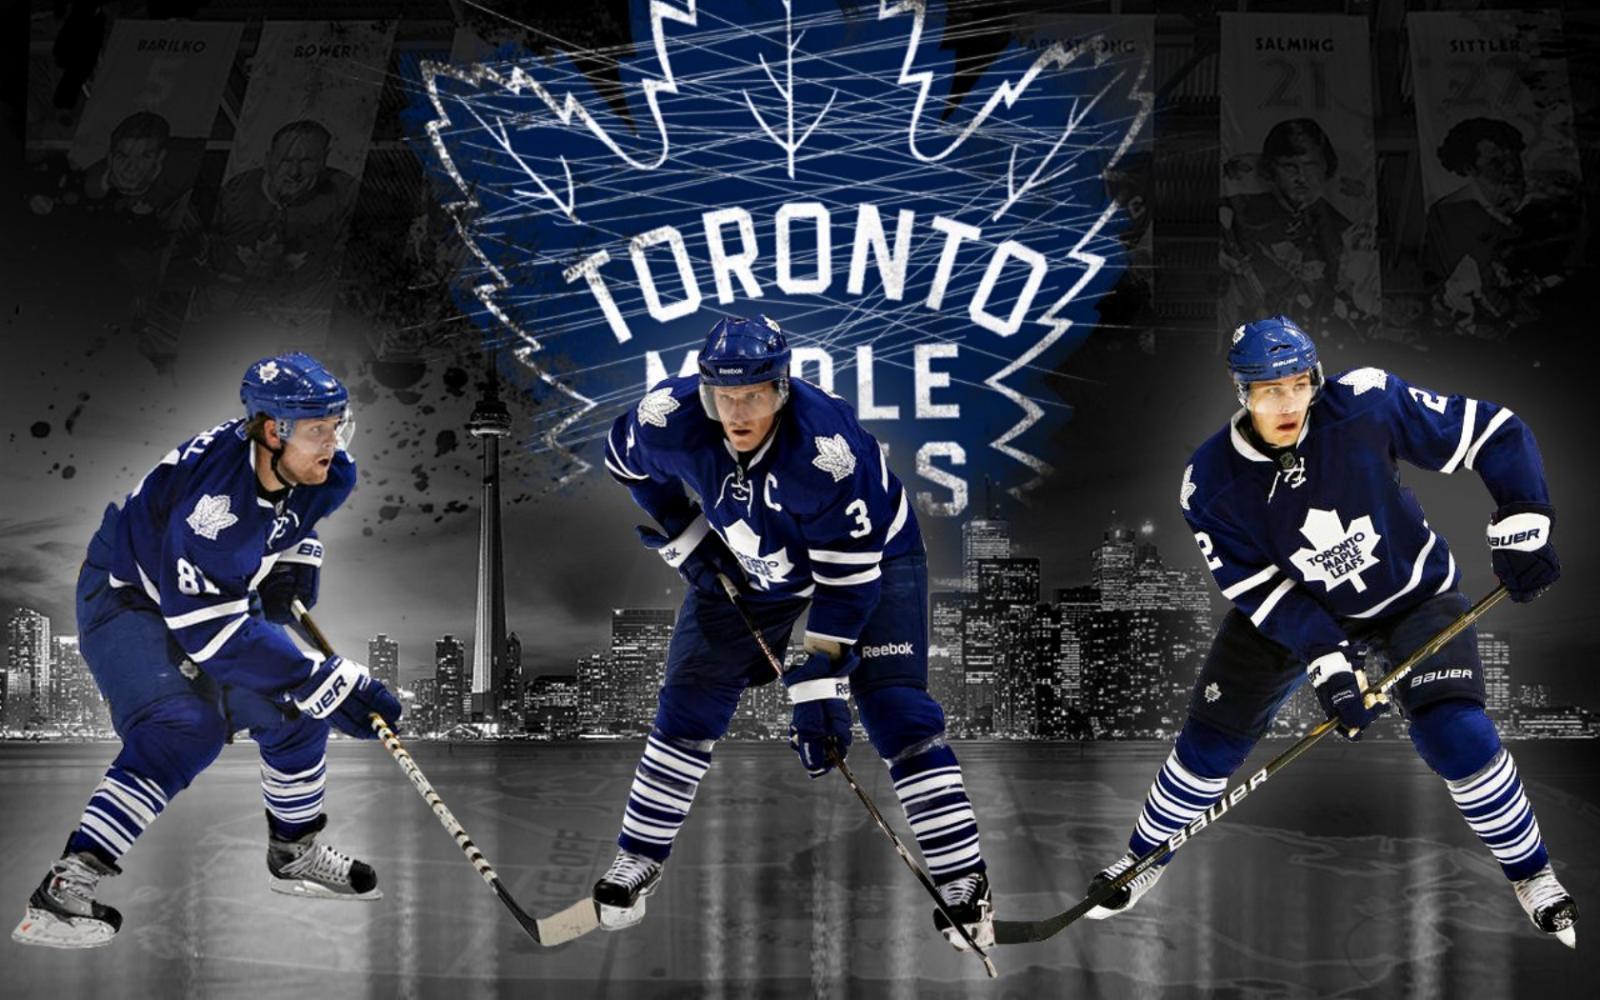 Toronto Maple Leafs Wallpapers - Wallpaper Cave